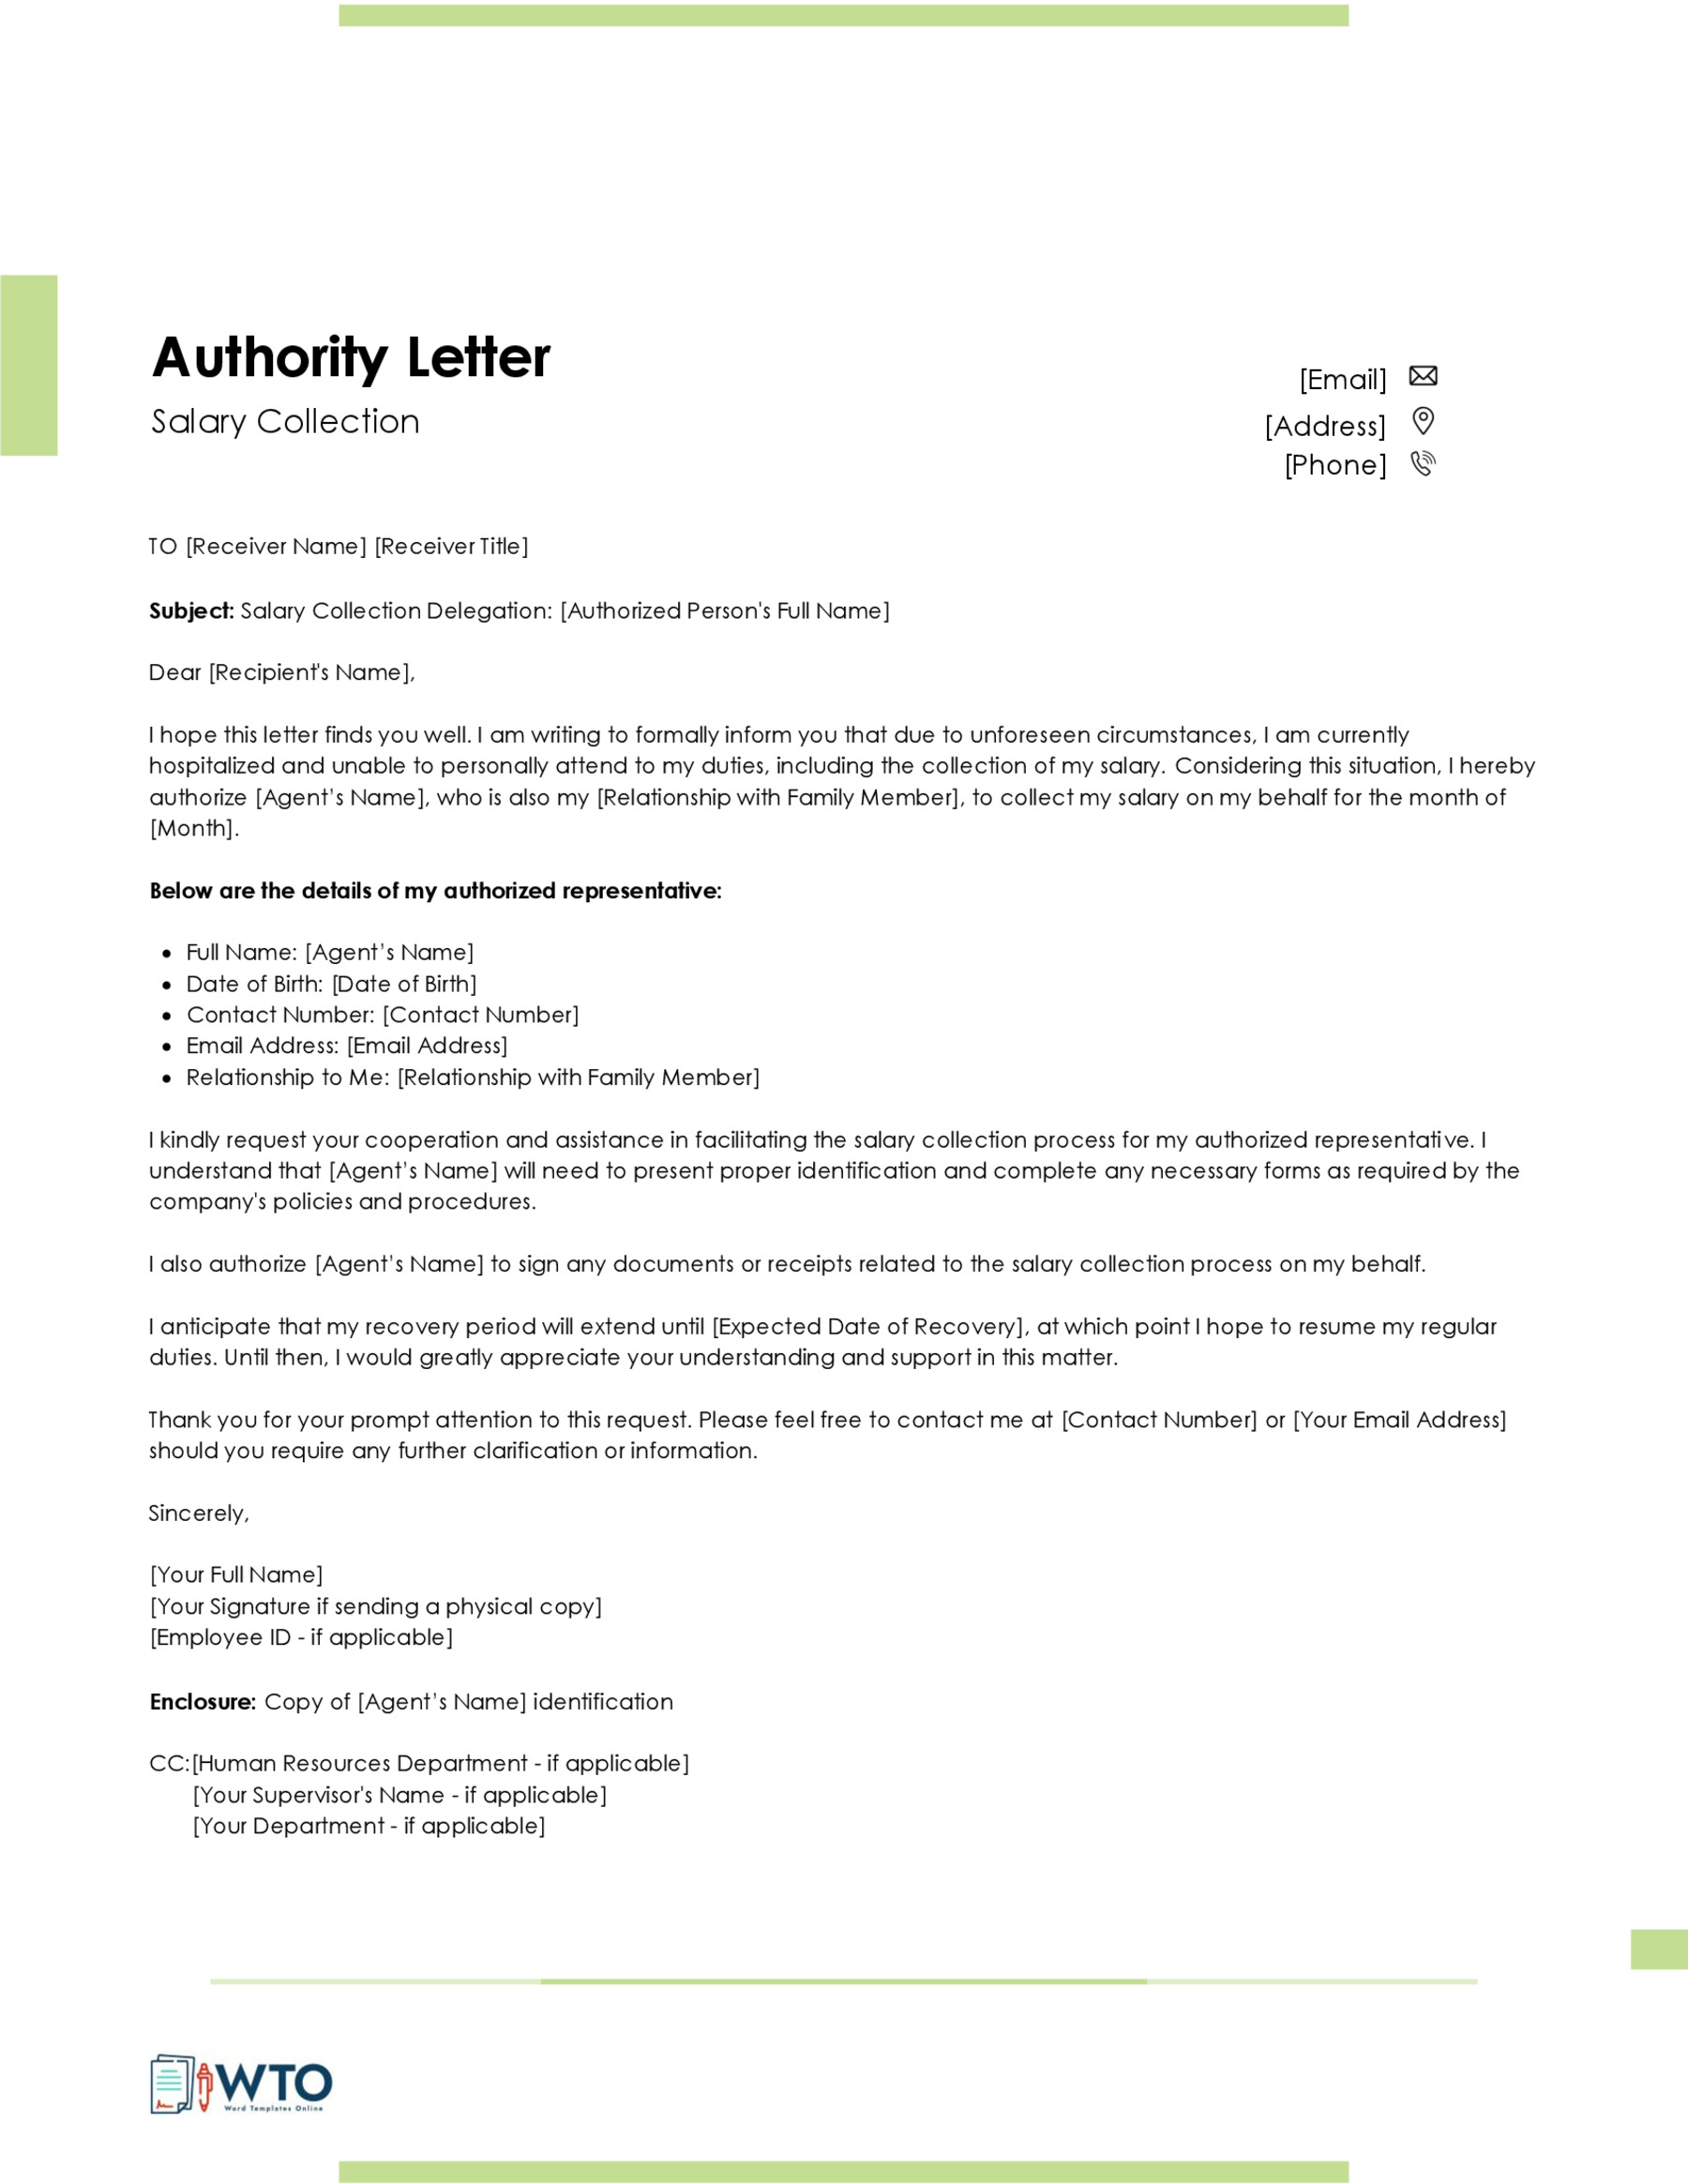 Authorization Letter to Collect Salary Template-Word Format